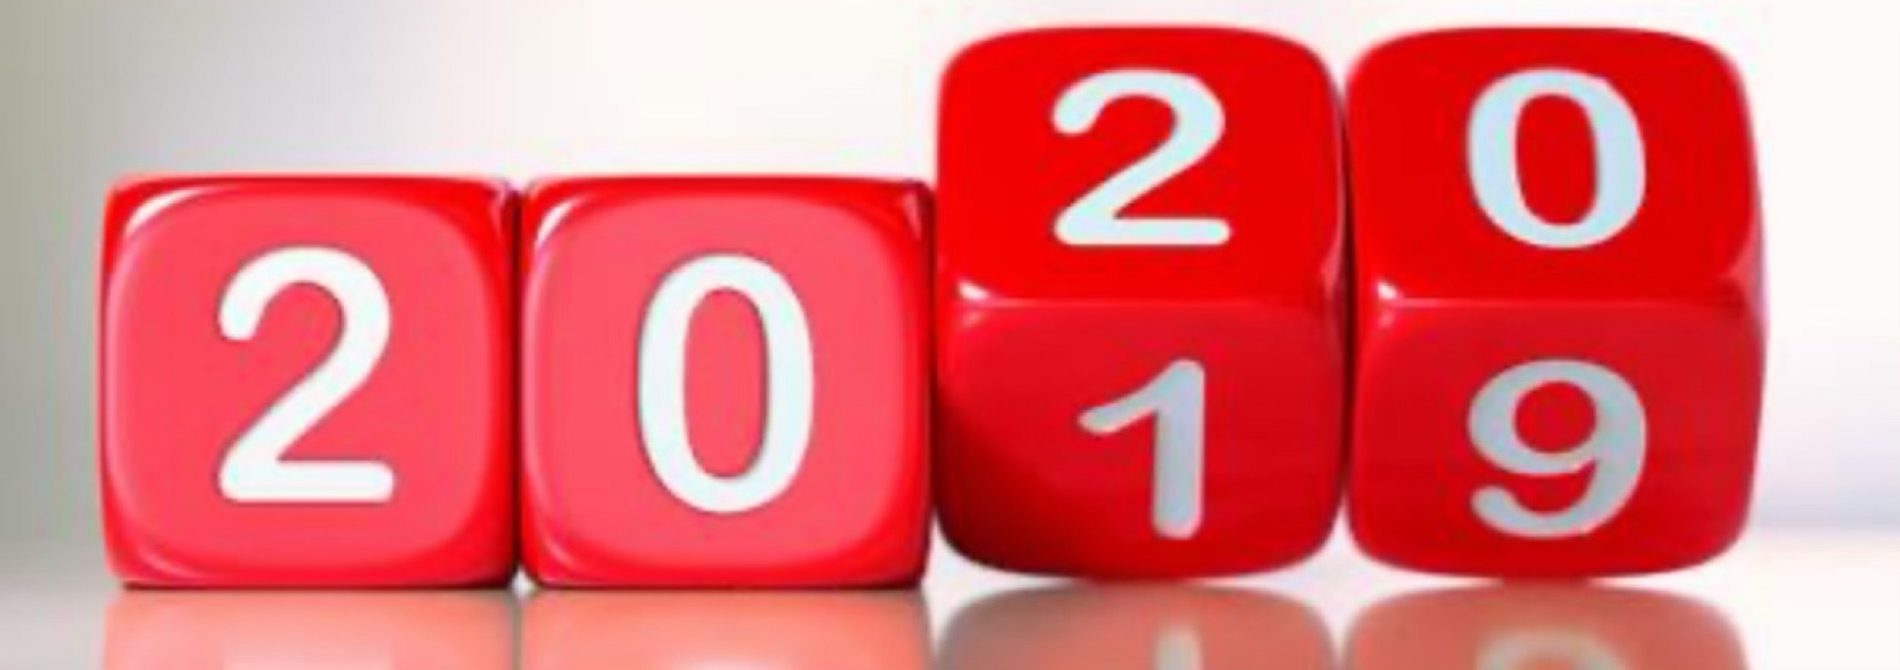 4 Red dice with white numbers showing 2019 changing to 2020